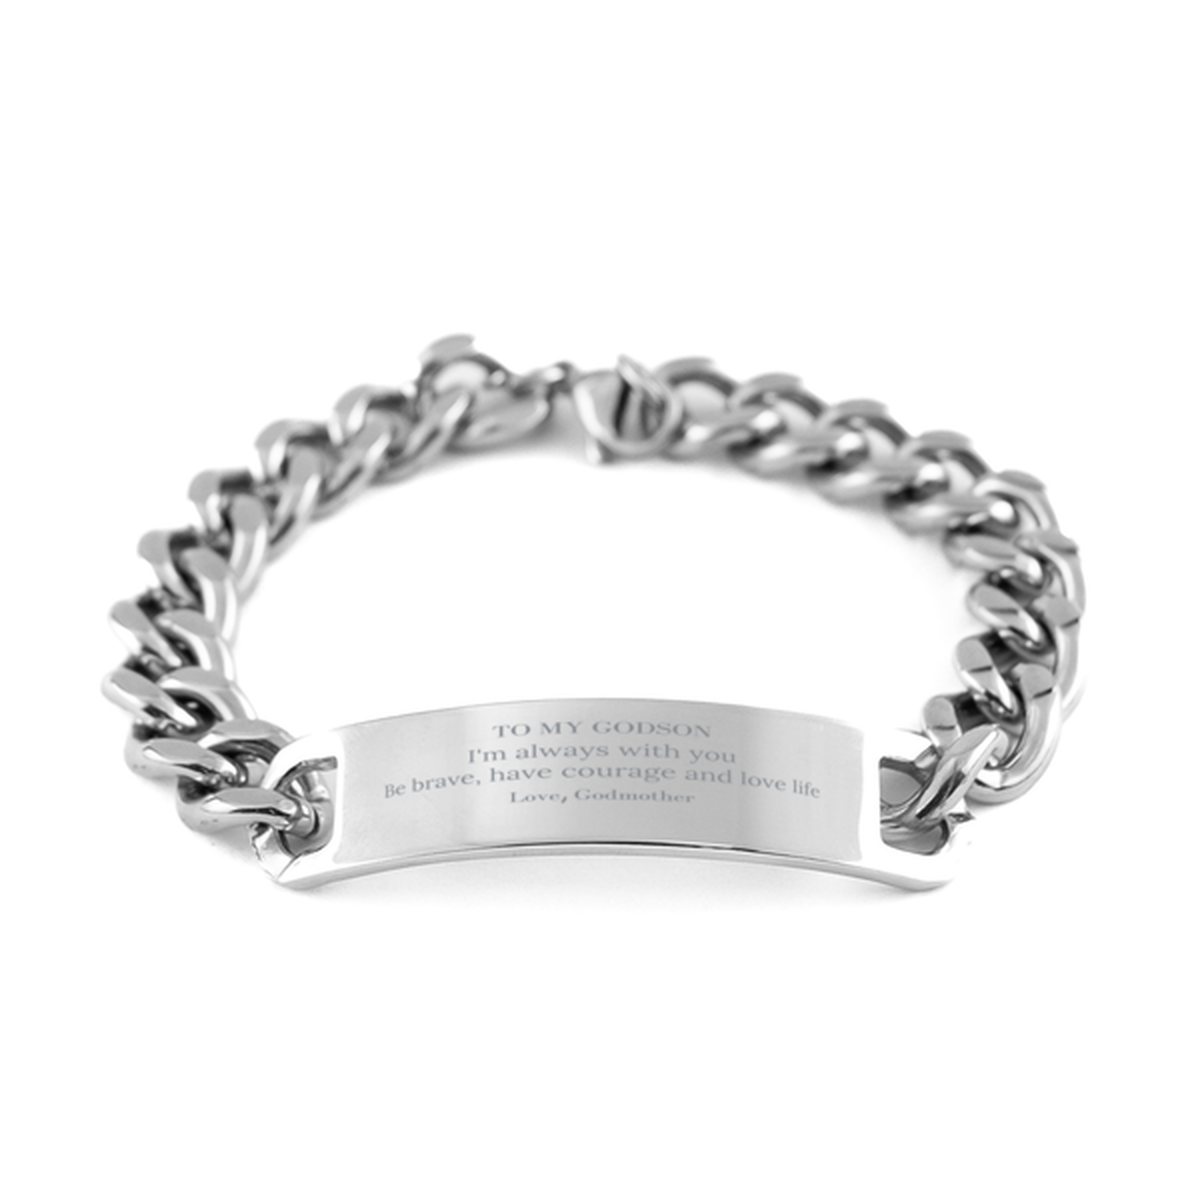 To My Godson Gifts from Godmother, Unique Cuban Chain Stainless Steel Bracelet Inspirational Christmas Birthday Graduation Gifts for Godson I'm always with you. Be brave, have courage and love life. Love, Godmother